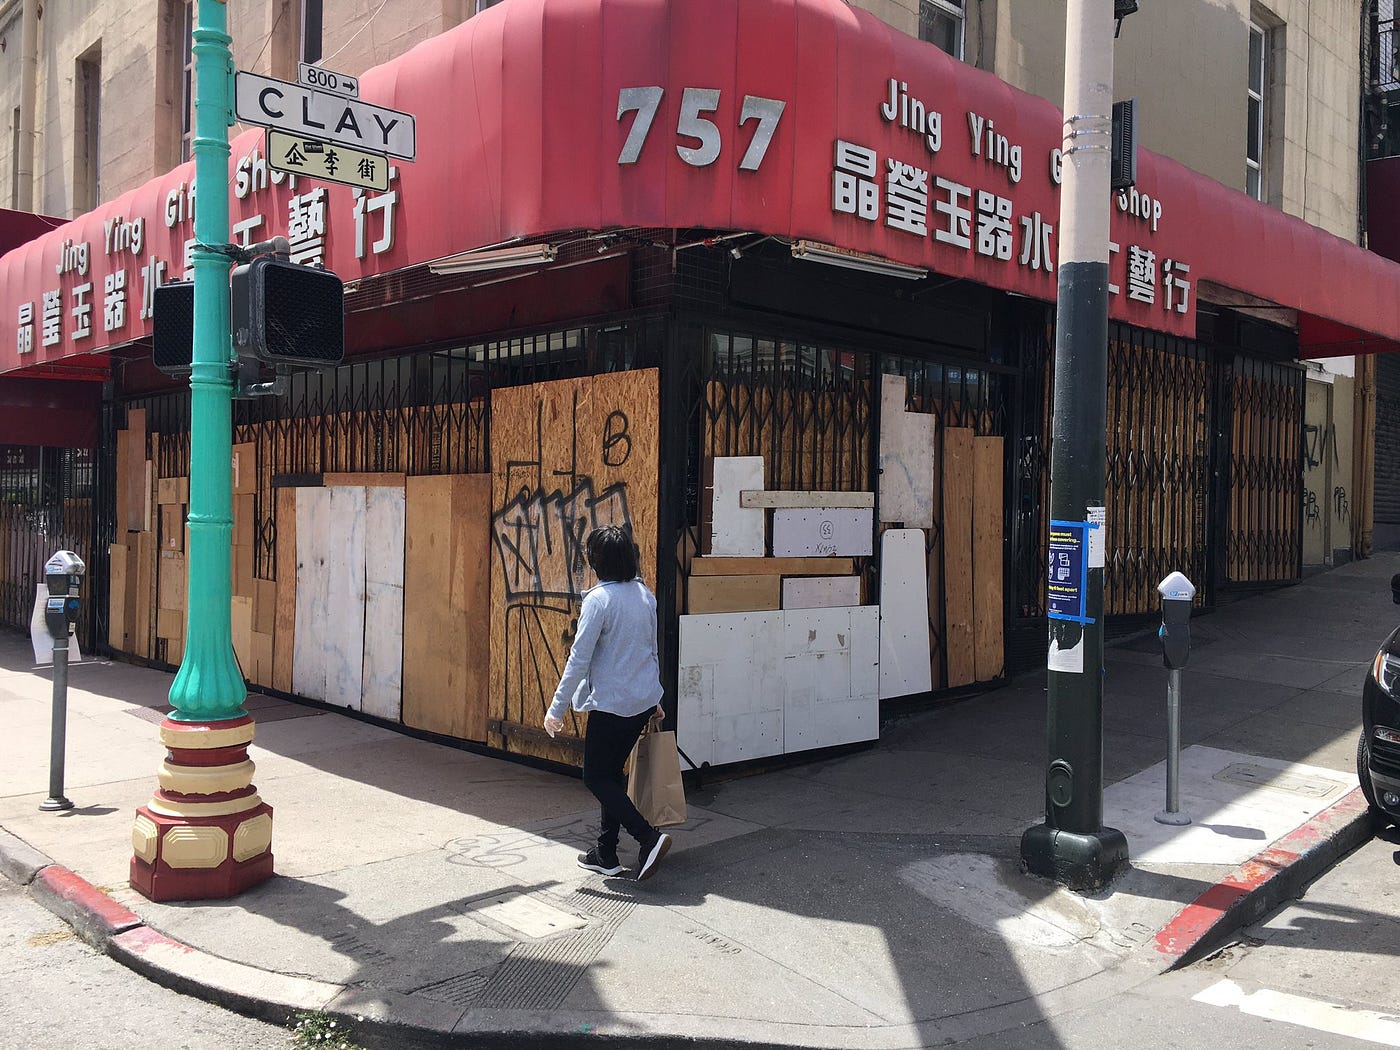 San Francisco Chinatown traumatized after looting, struggles to